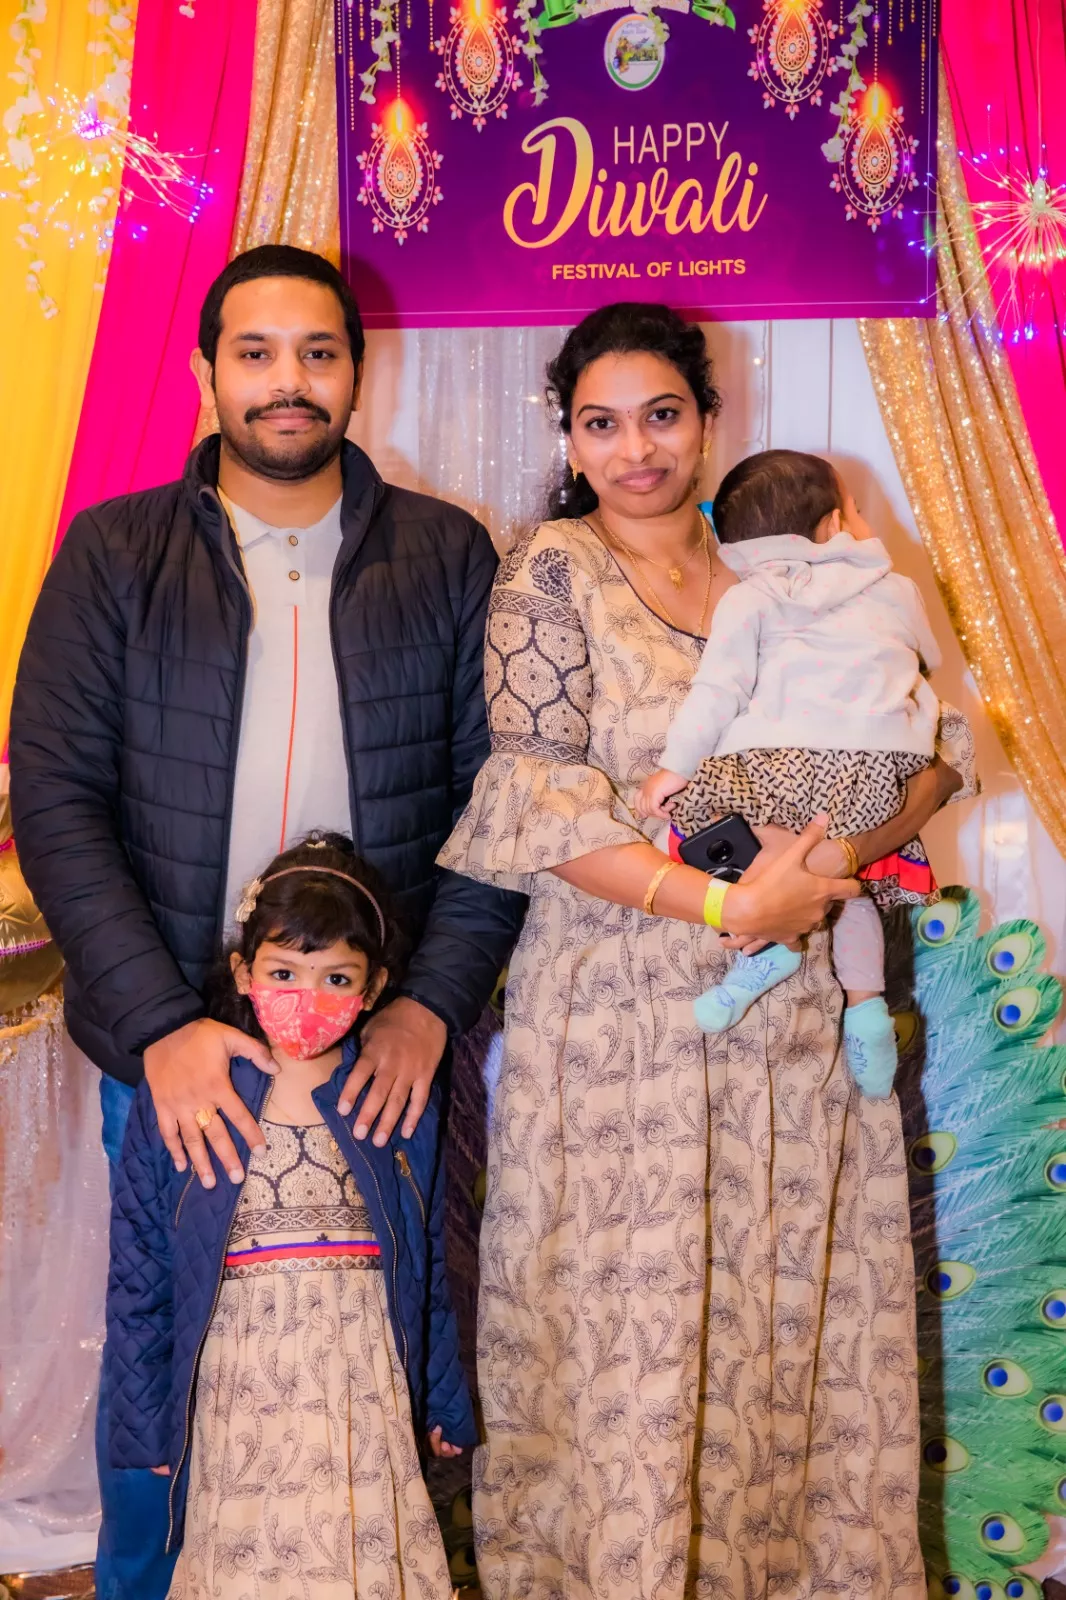 Saisudha holding her younger daughter, standing next to her are her husband and the second daughter.